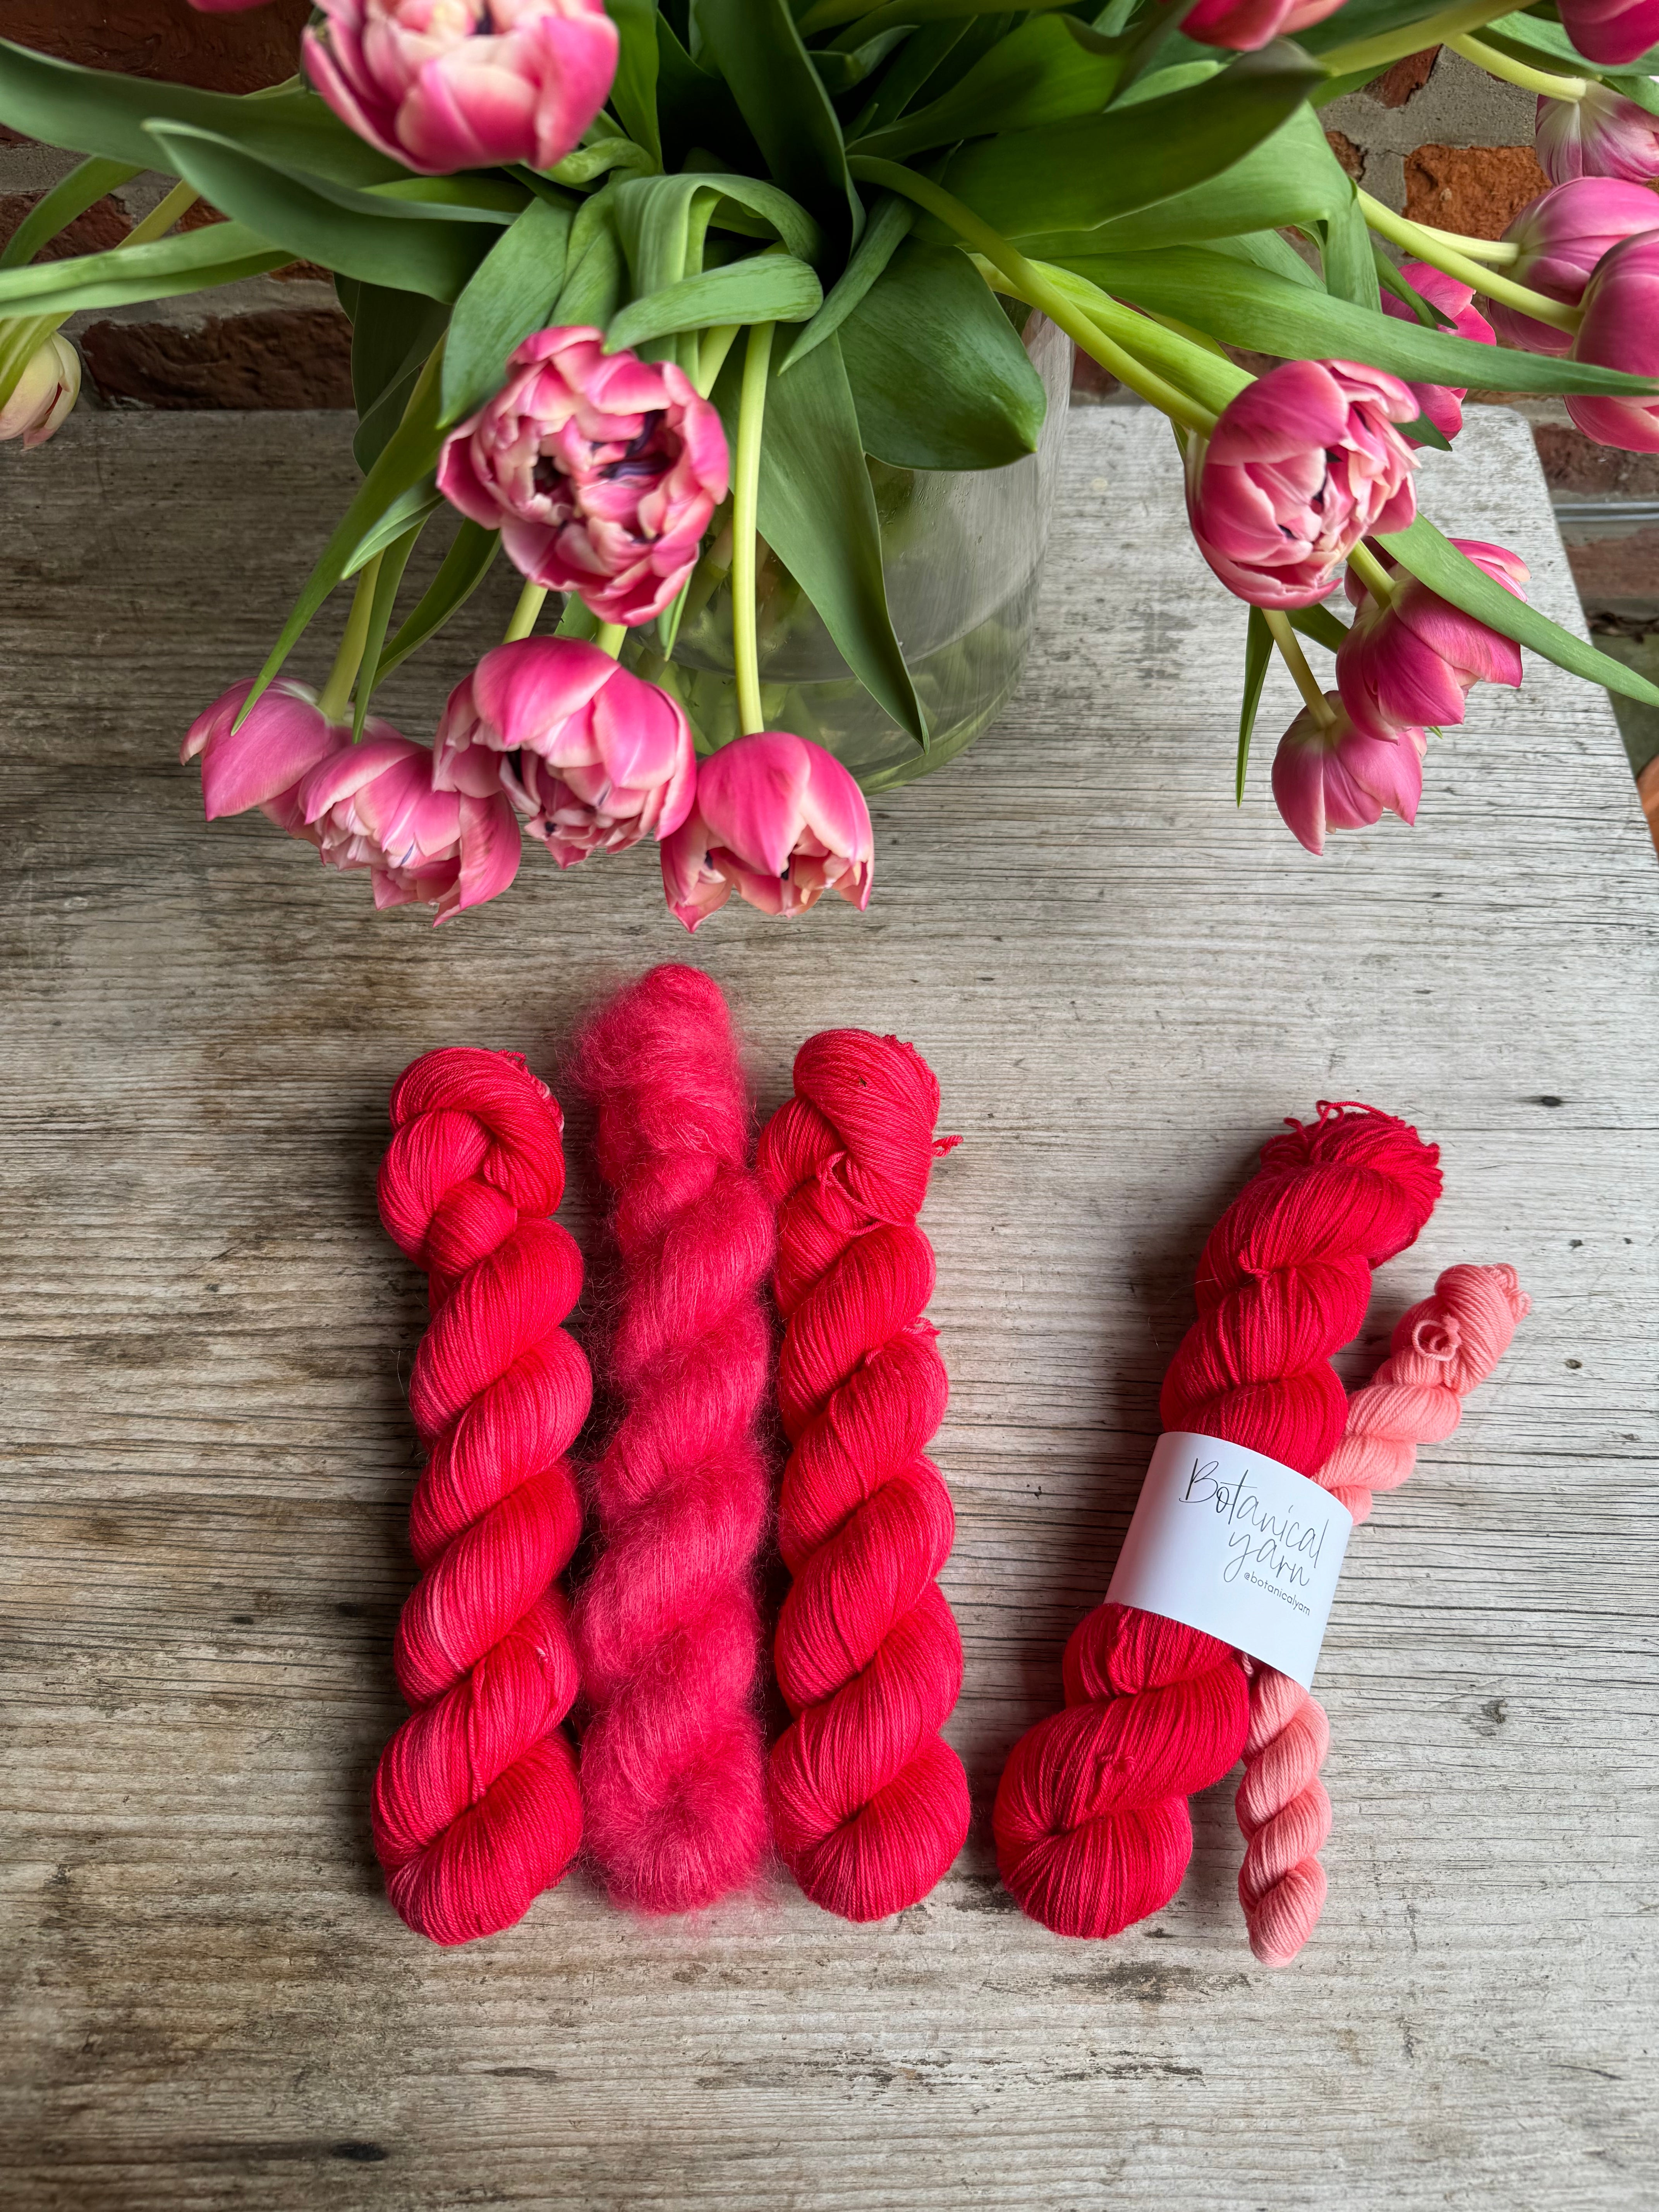 Dyed to order - Tulip Red Riding Hood